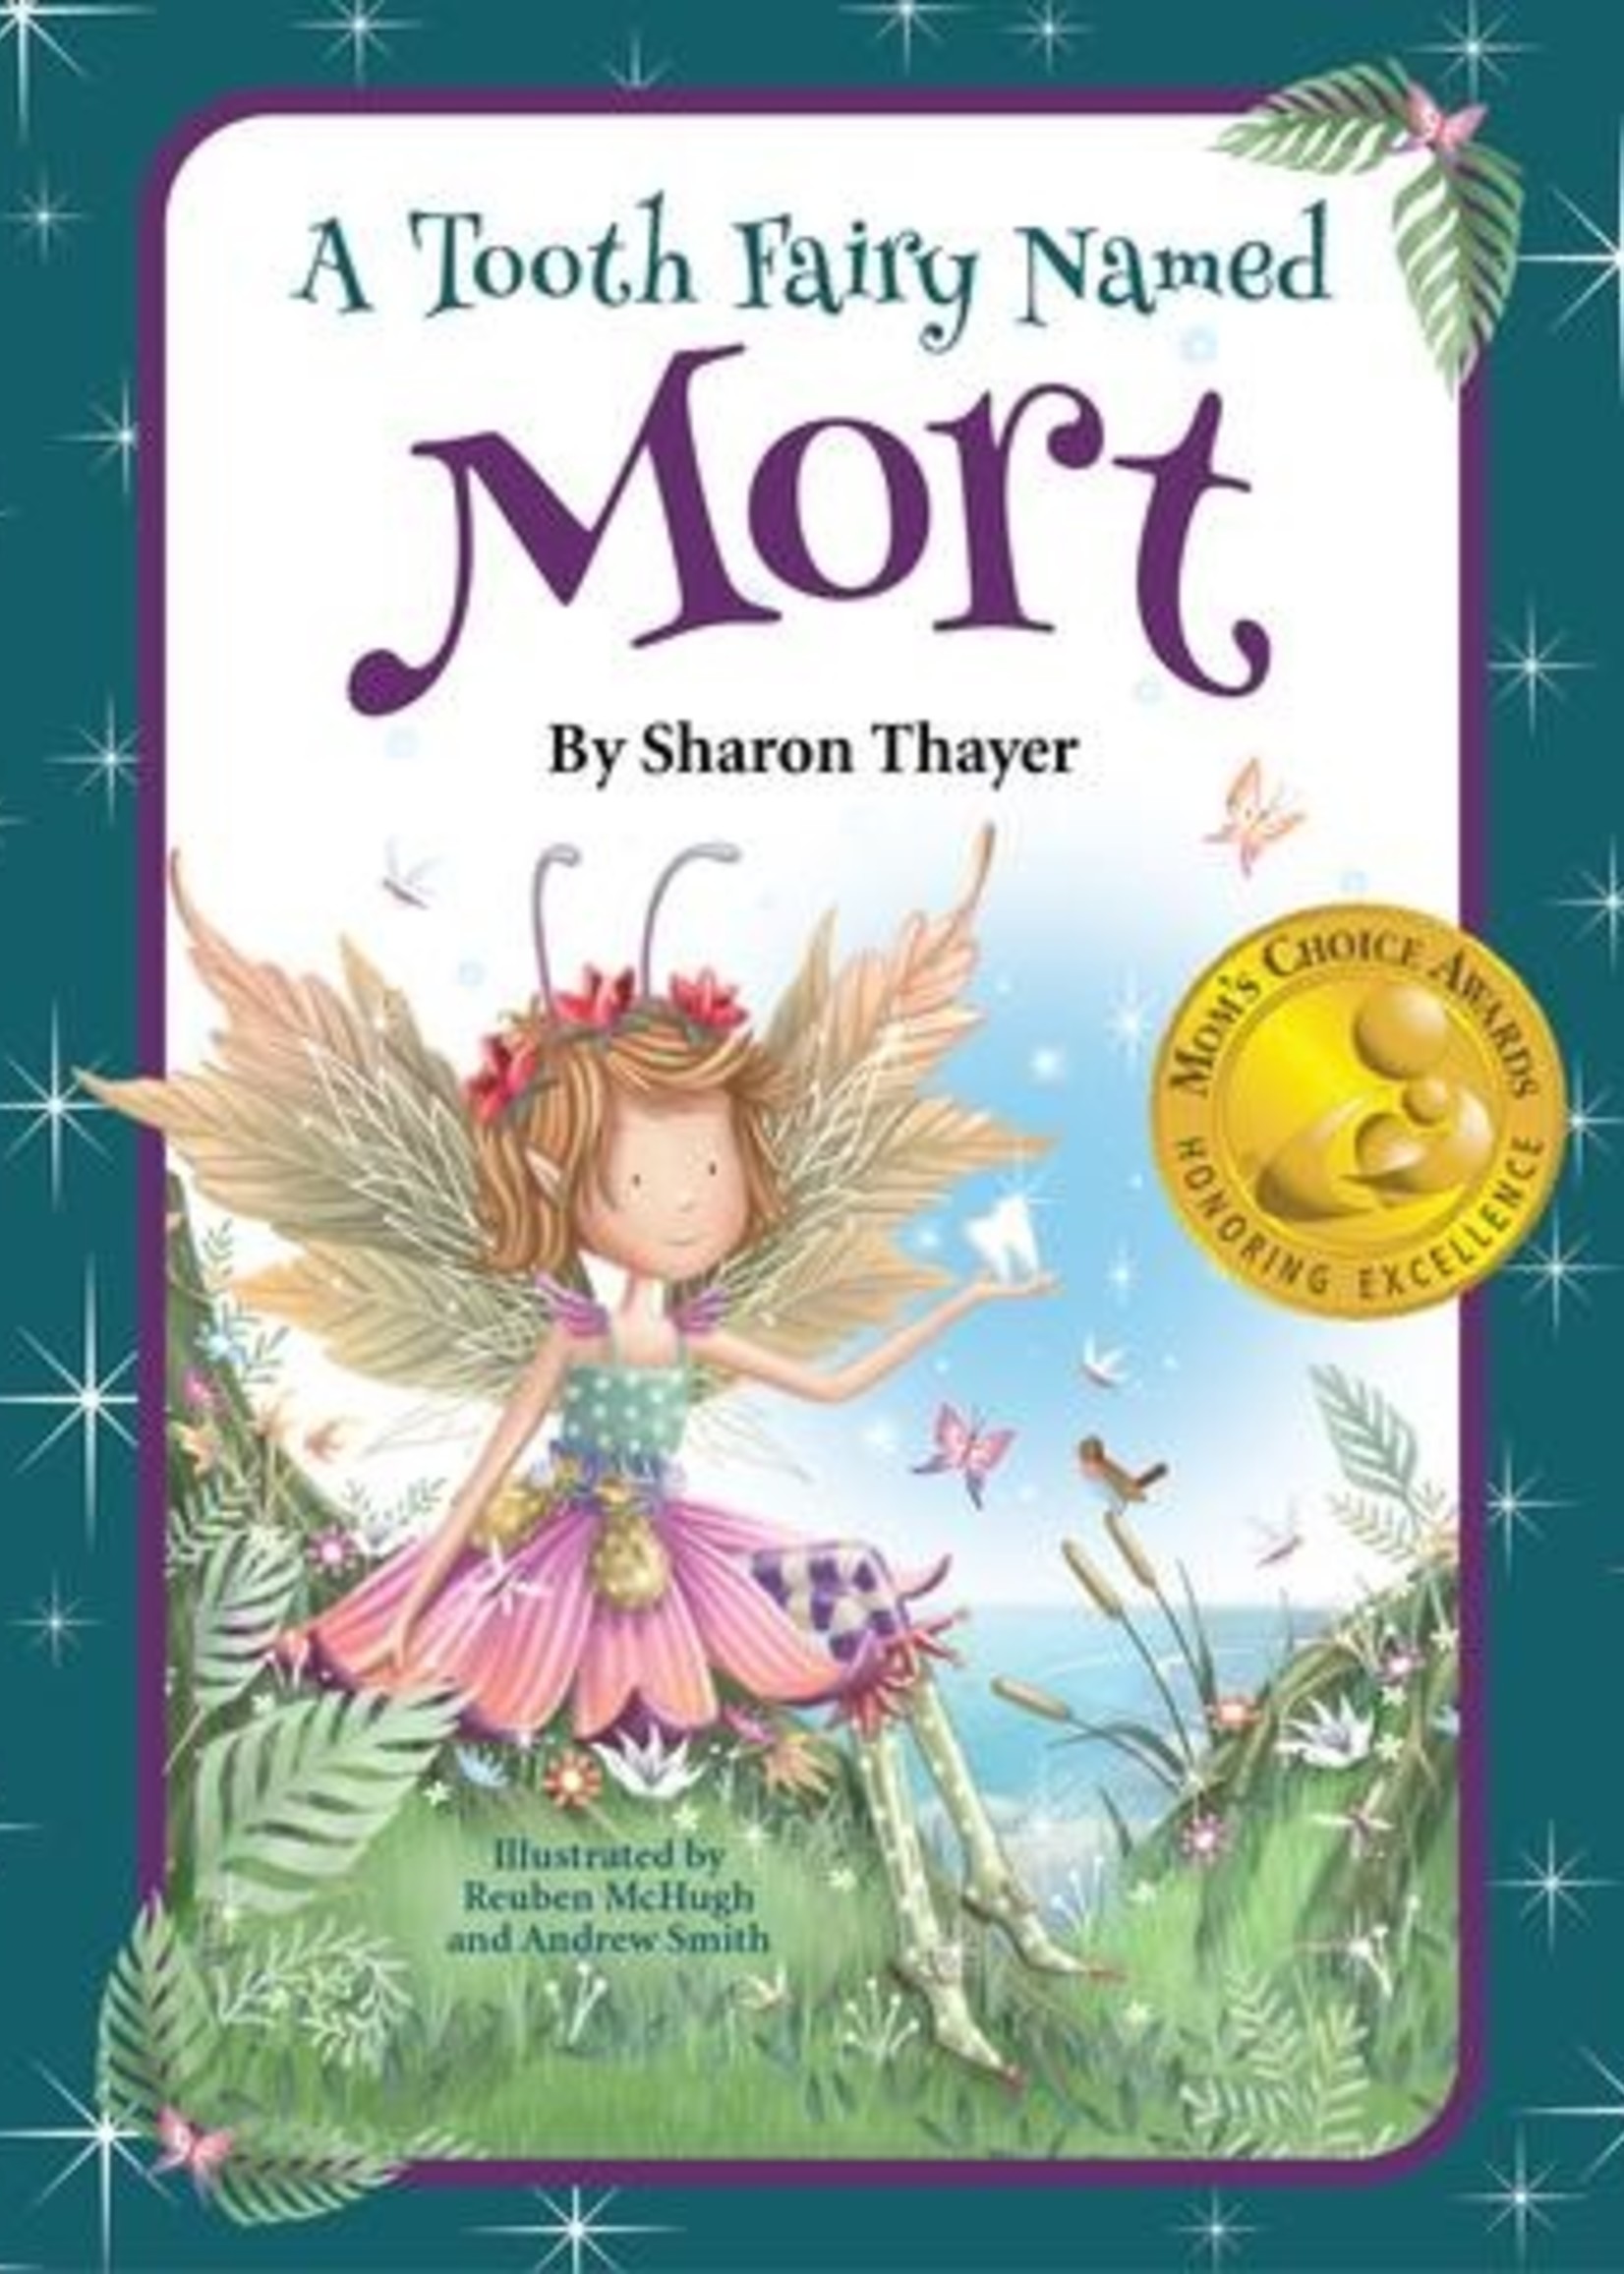 Carousel Publishing A Tooth Fairy Named Mort